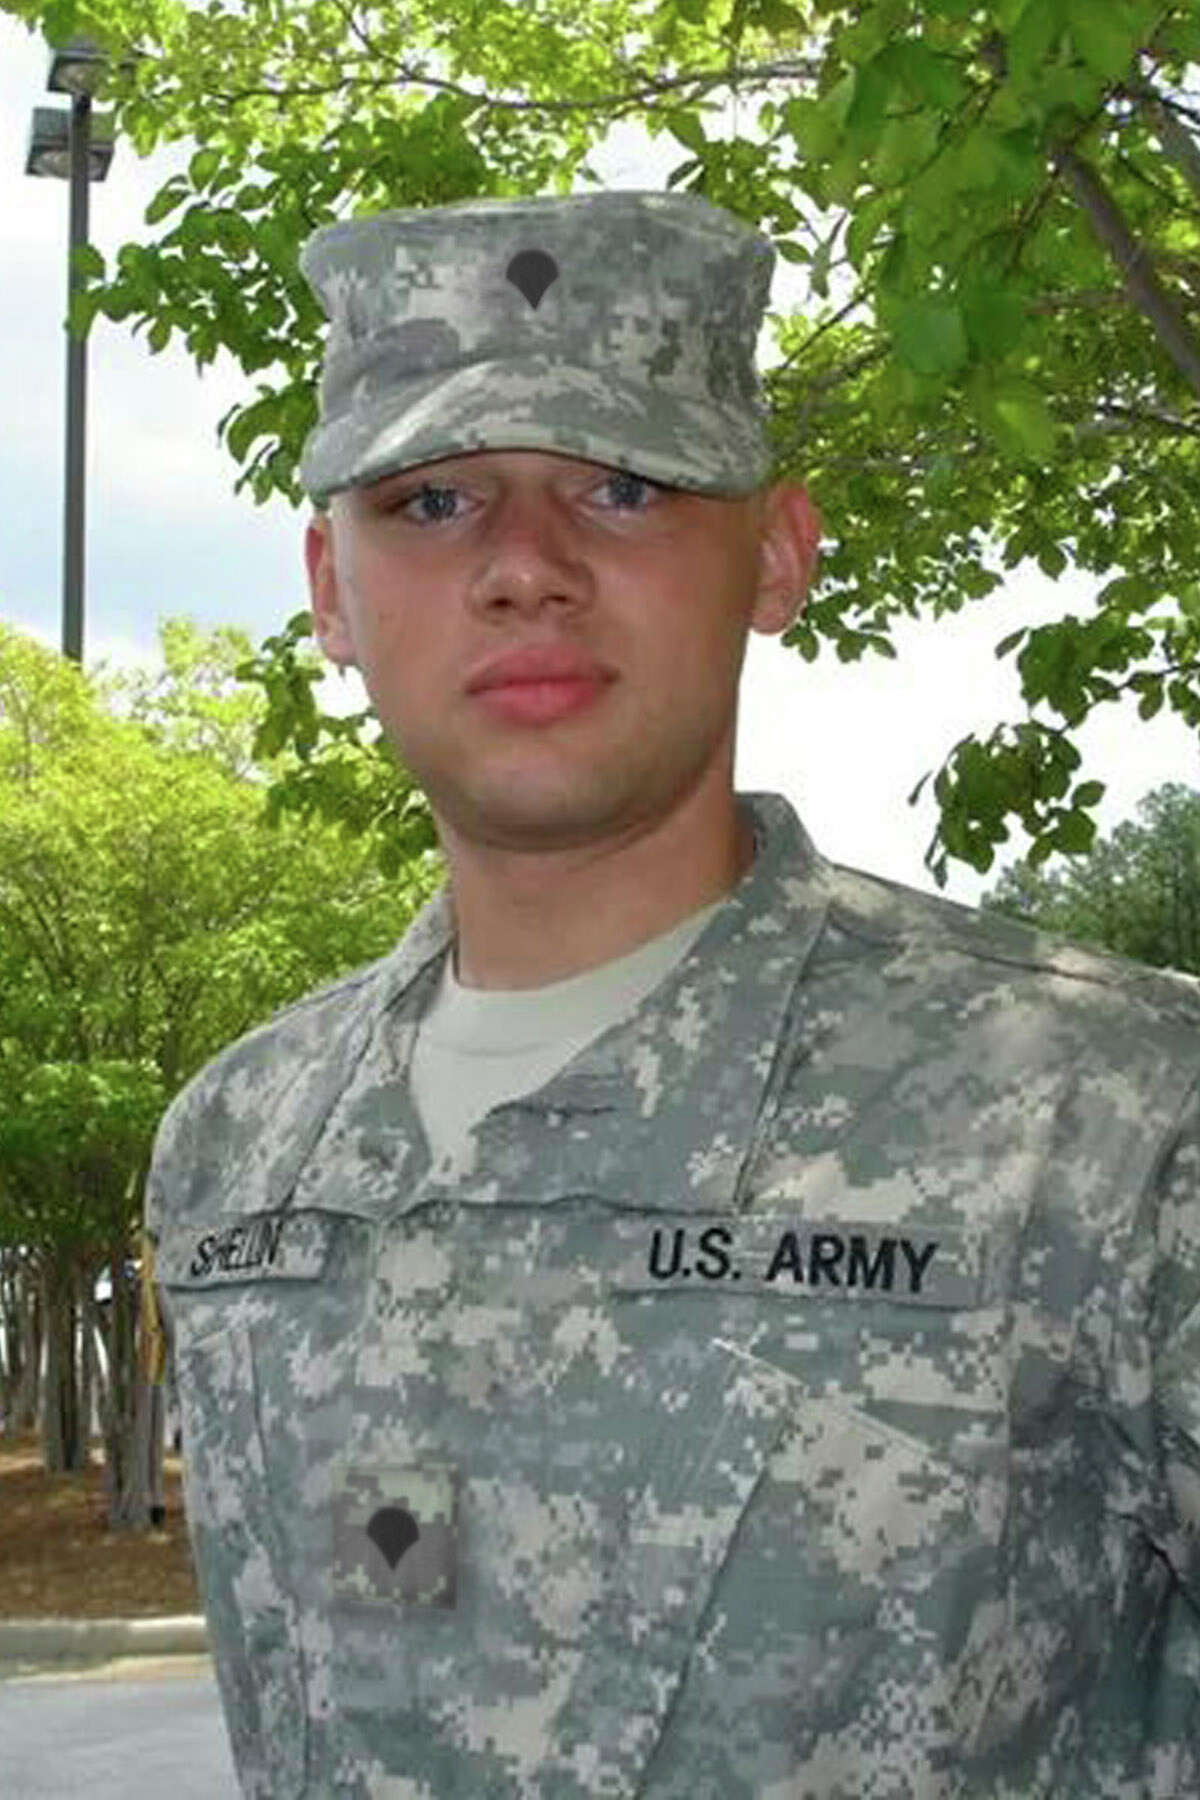 Spc. Gage Matthew-Gilbert Schellin died Nov. 2 from injuries suffered from an apparent gunshot wound at his off-post residence in Killeen, Texas. Spc. Gage Matthew-Gilbert Schellin, 22, whose home of record is listed as Fort Walton Beach, Florida, entered active duty service in May 2012 as a field artillery firefinder radar operator. He was assigned to Headquarters and Headquarters Battery, 3rd Battalion, 82nd Field Artillery Regiment, 2nd Brigade Combat Team, 1st Cavalry Division, Fort Hood, since Aug. 2014. Schellin deployed in support of Operation Enduring Freedom from July 2013 to March 2014. Schellin's awards and decorations include the National Defense Service Medal, Global War on Terrorism Service Medal, Afghanistan Campaign Medal with campaign star, Army Good Conduct Medal, NATO Medal and Army Service Ribbon.